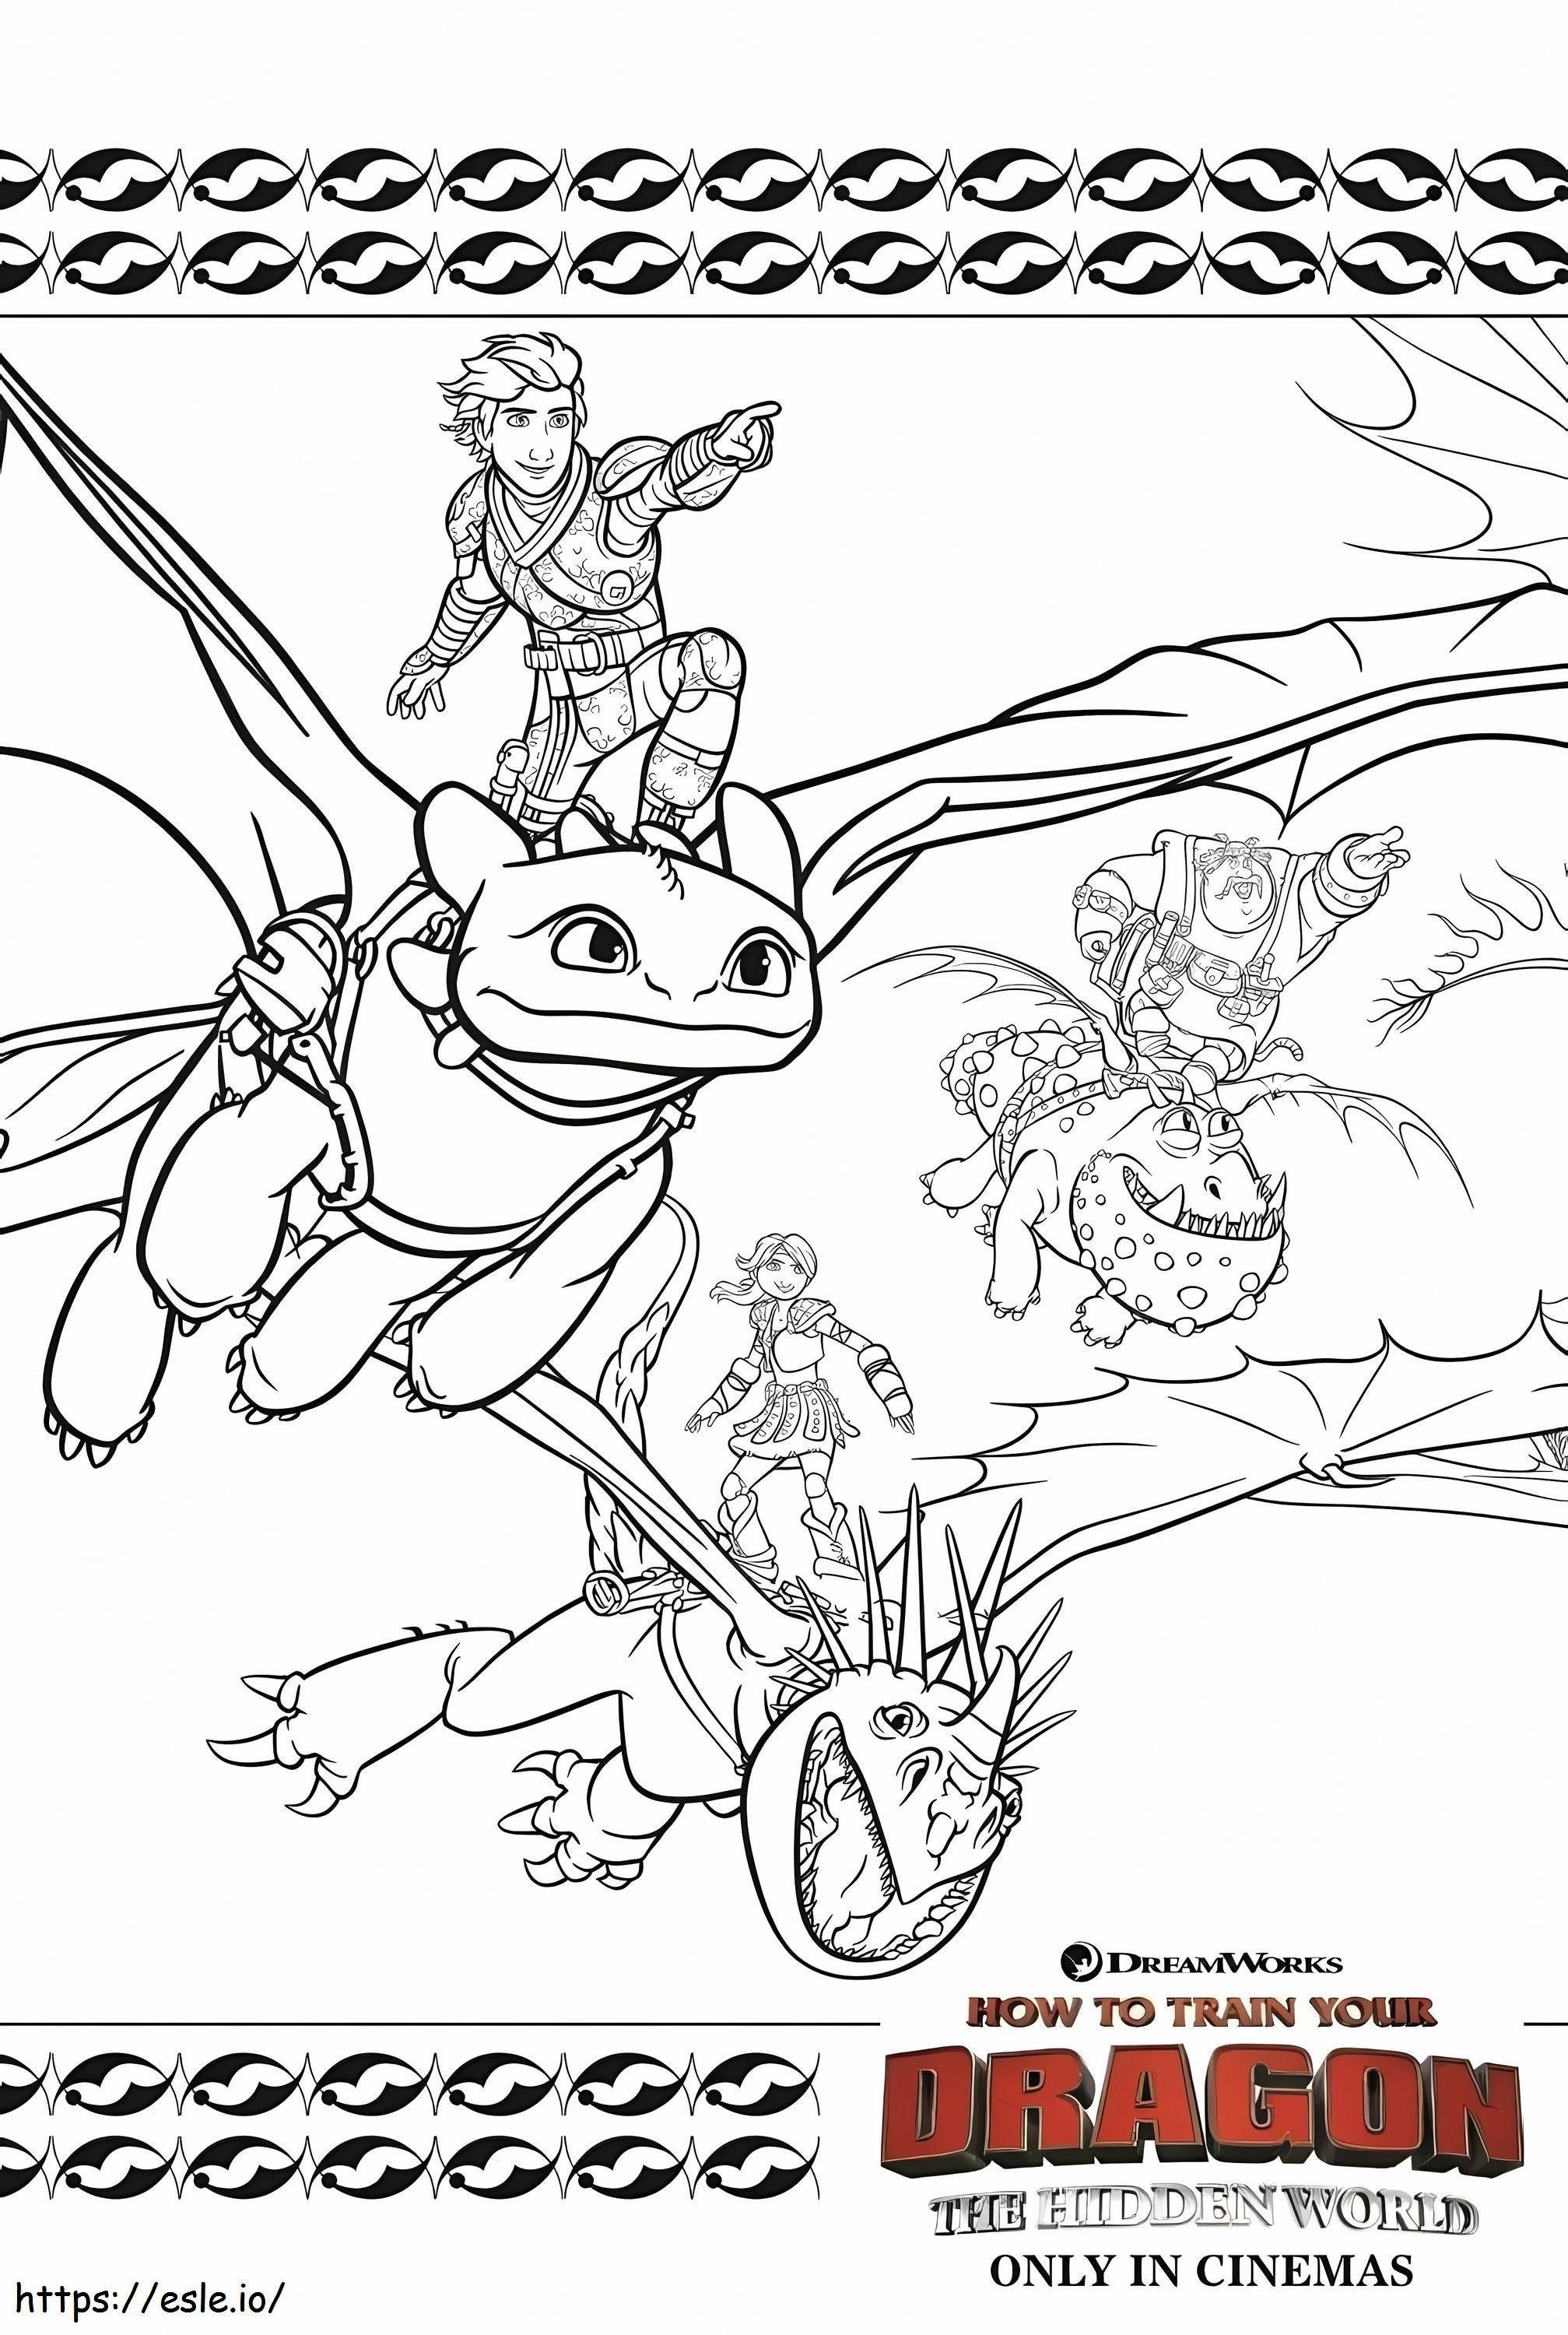 How To Train Your Dragon 3 coloring page